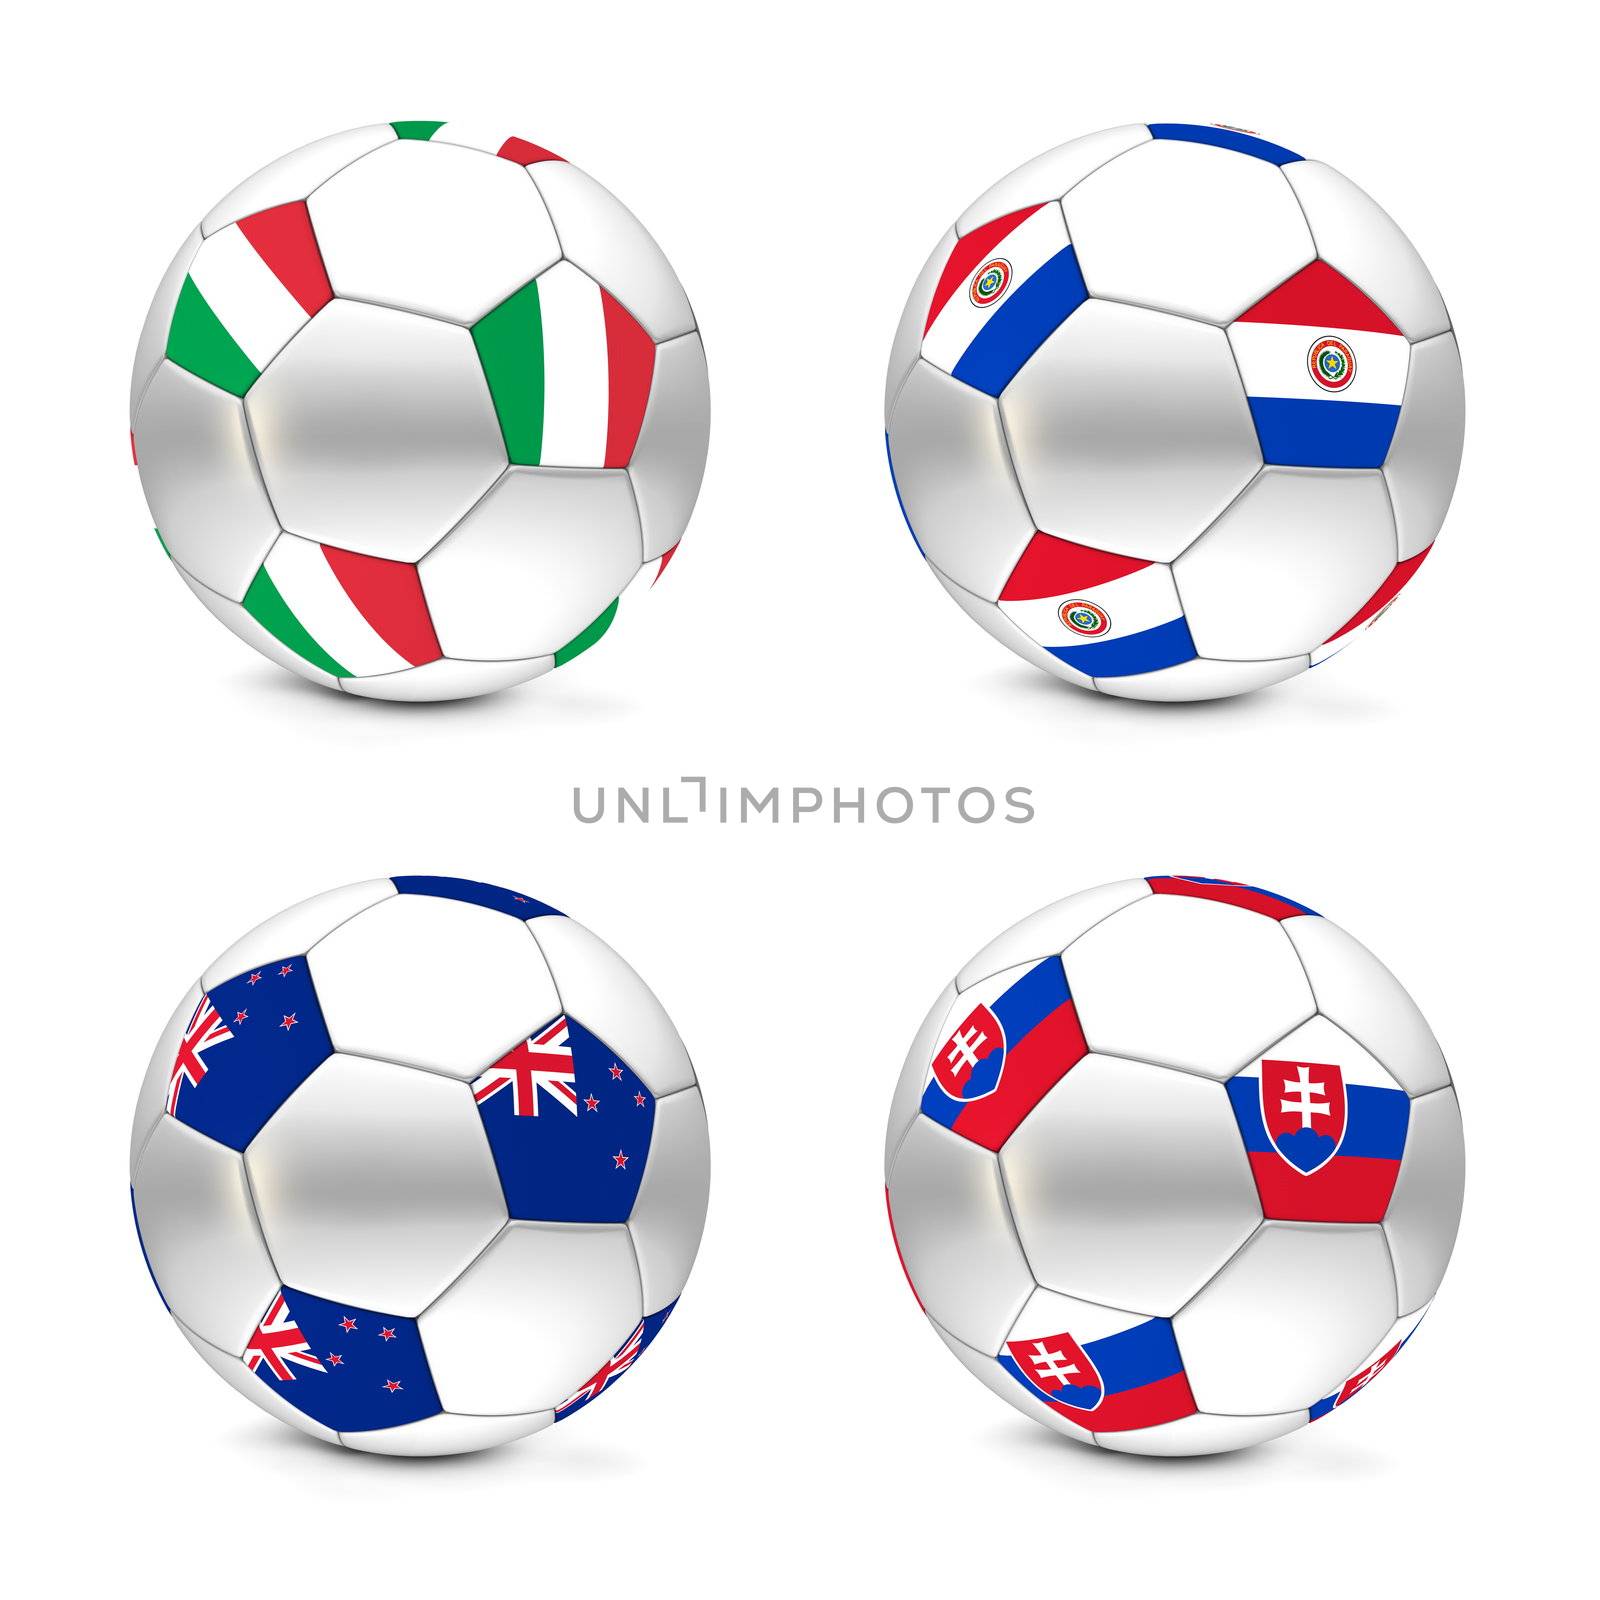 four footballs/soccer balls with the flags of Italy, Paraguay, New Zealand and Slovakia - world championship South Africa 2010 group F